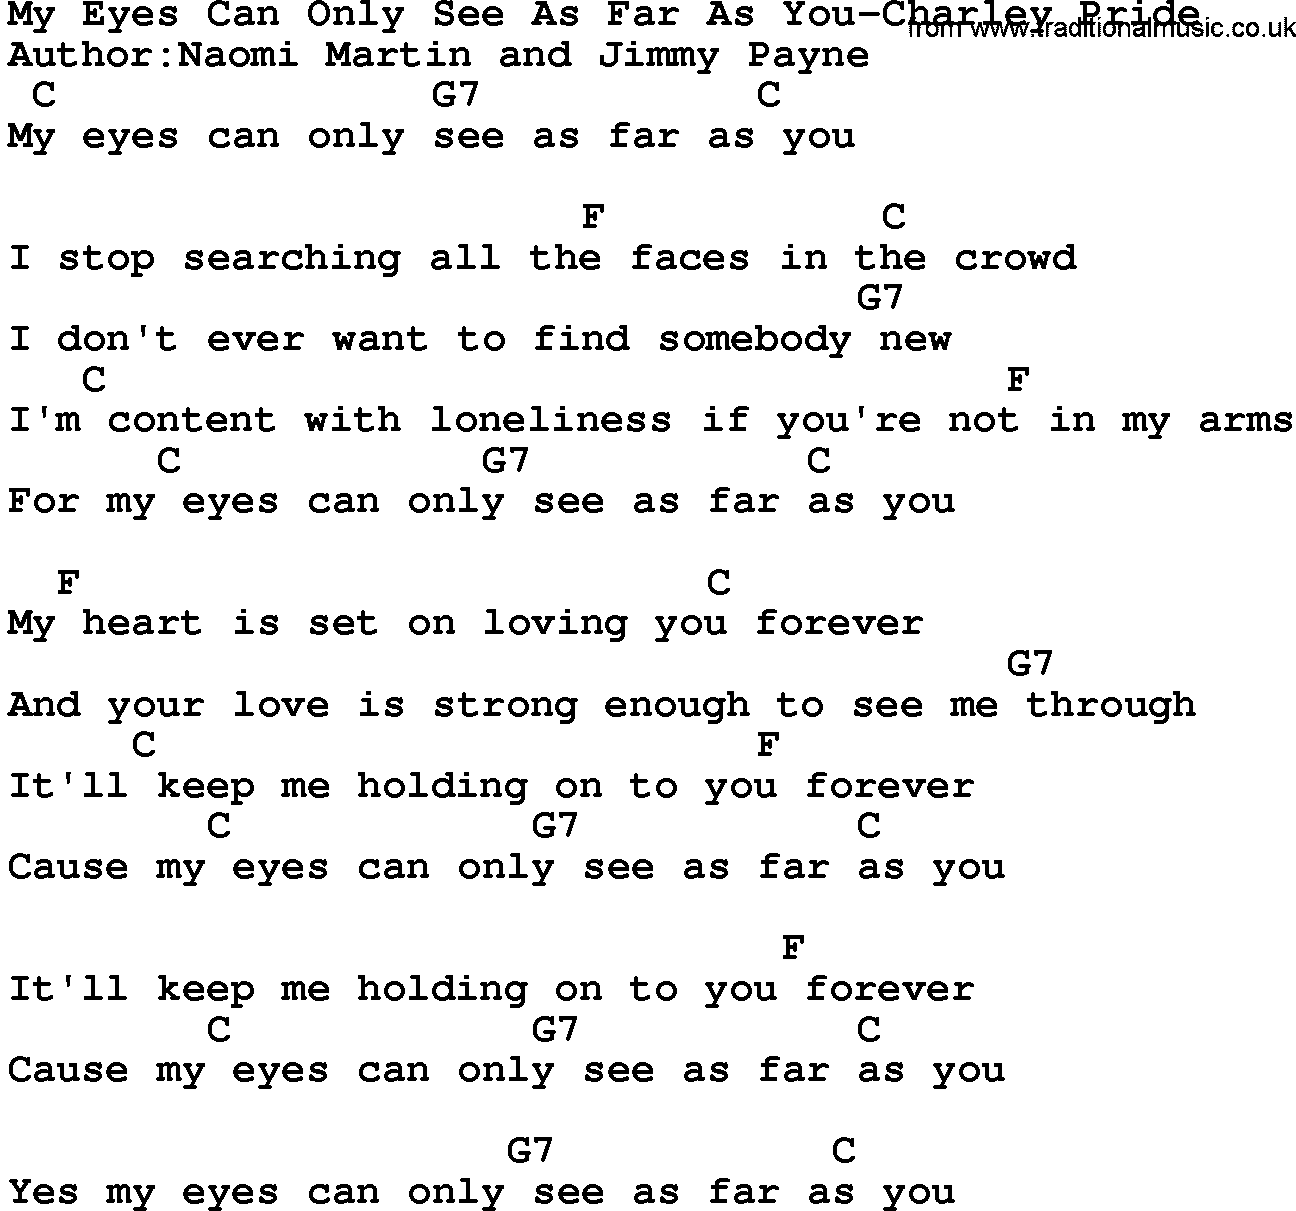 Country music song: My Eyes Can Only See As Far As You-Charley Pride lyrics and chords